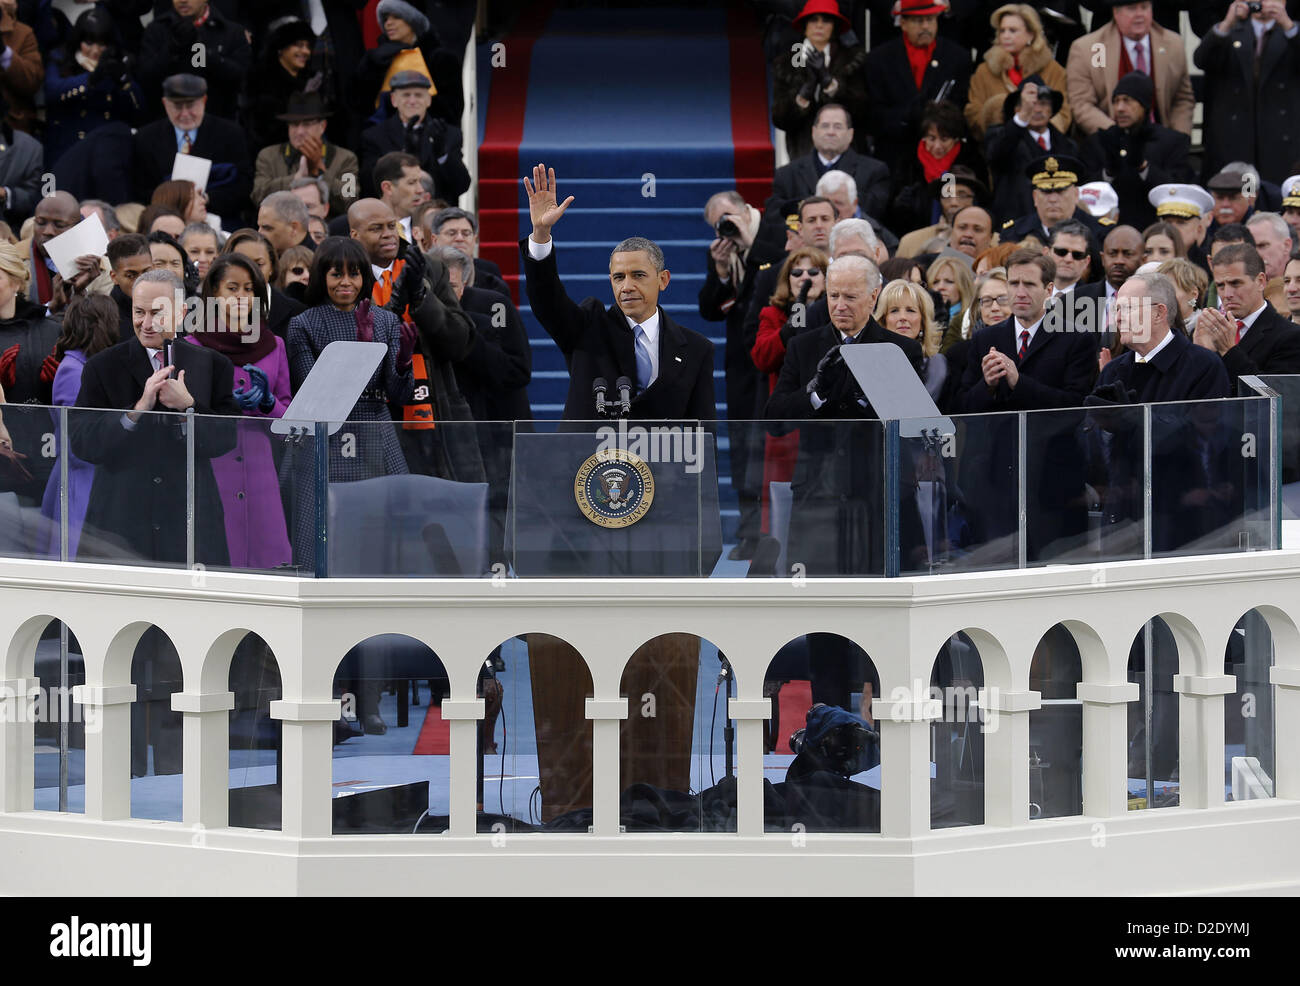 Jan. 21, 2013 - Washington, District Of Columbia, USA - President Barack Obama waves to crowd after his Inaugural speech at the ceremonial swearing-in on the West Front of the U.S. Capitol during the 57th Presidential Inauguration in Washington, Monday, Jan. 21, 2013. (Credit Image: © Scott Andrews/Pool/Prensa Internacional/ZUMAPRESS.com) Stock Photo